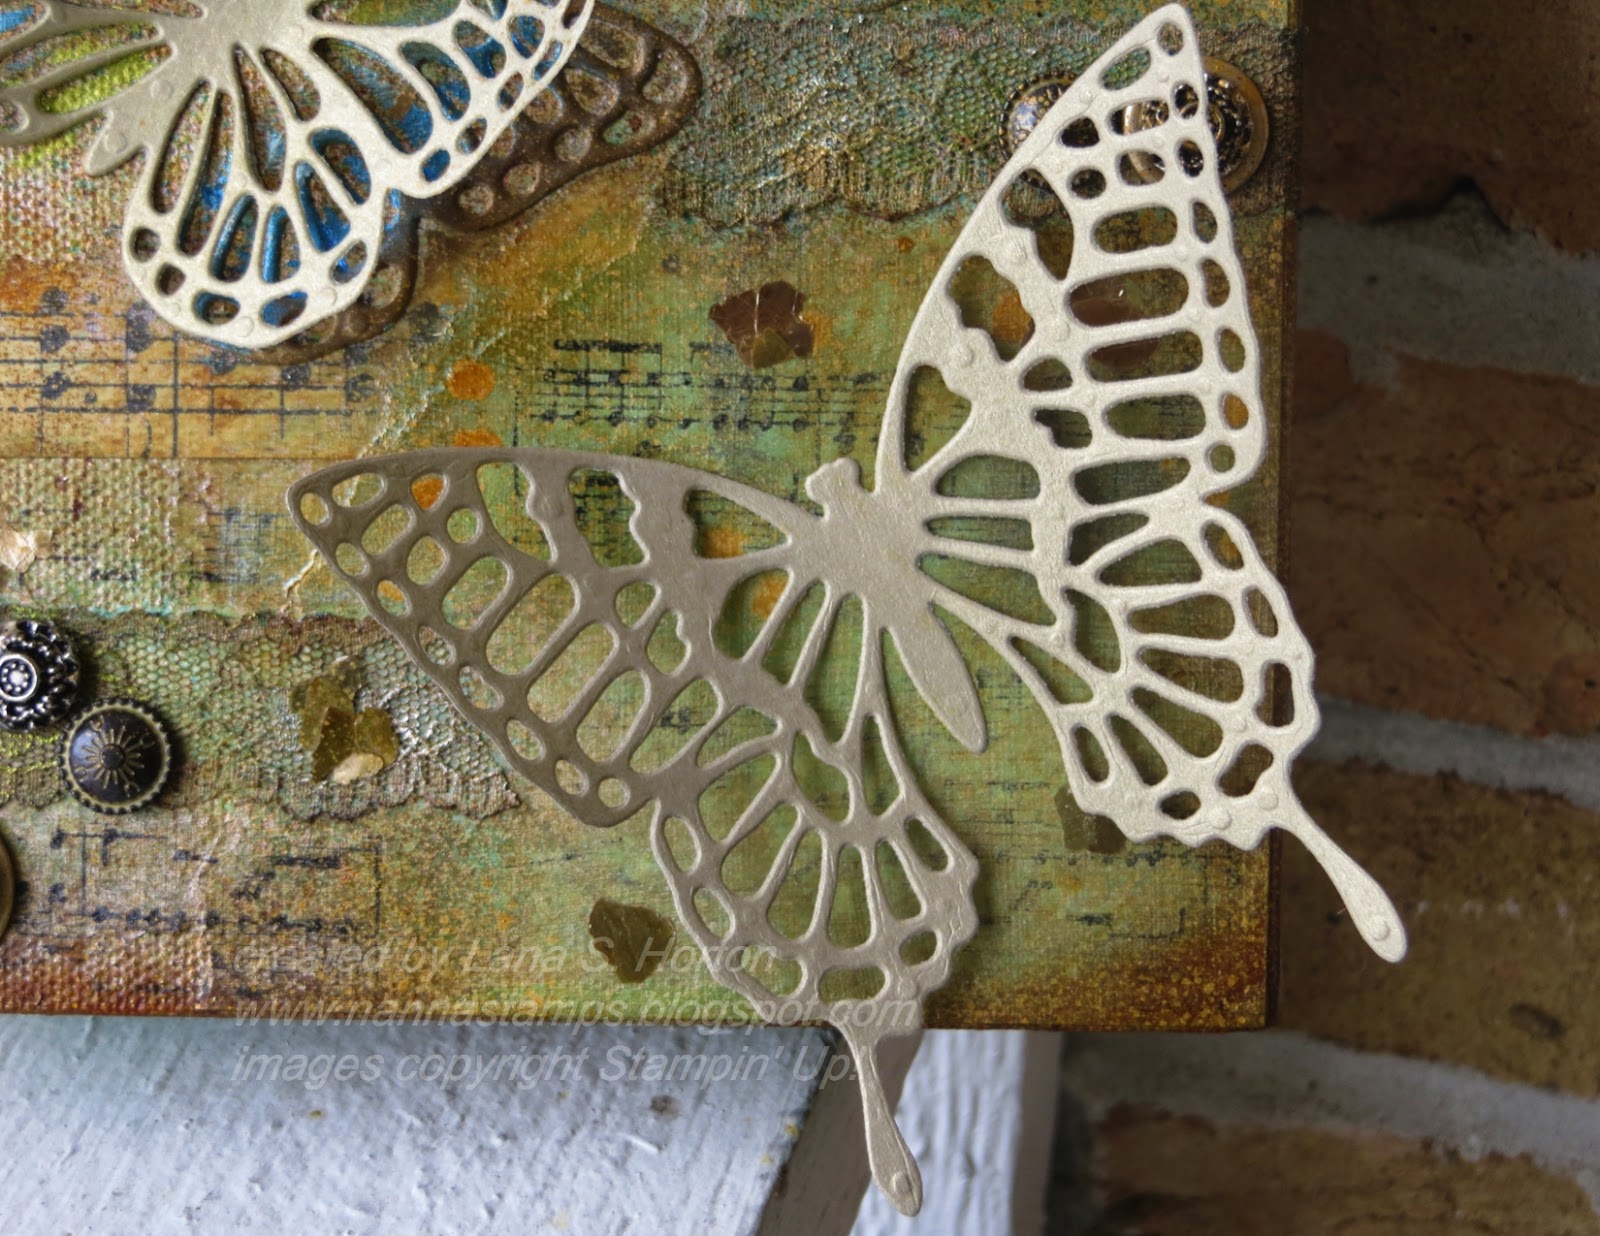 Stamping with Nanna: More Details About my Butterflies Mixed Media Art ...